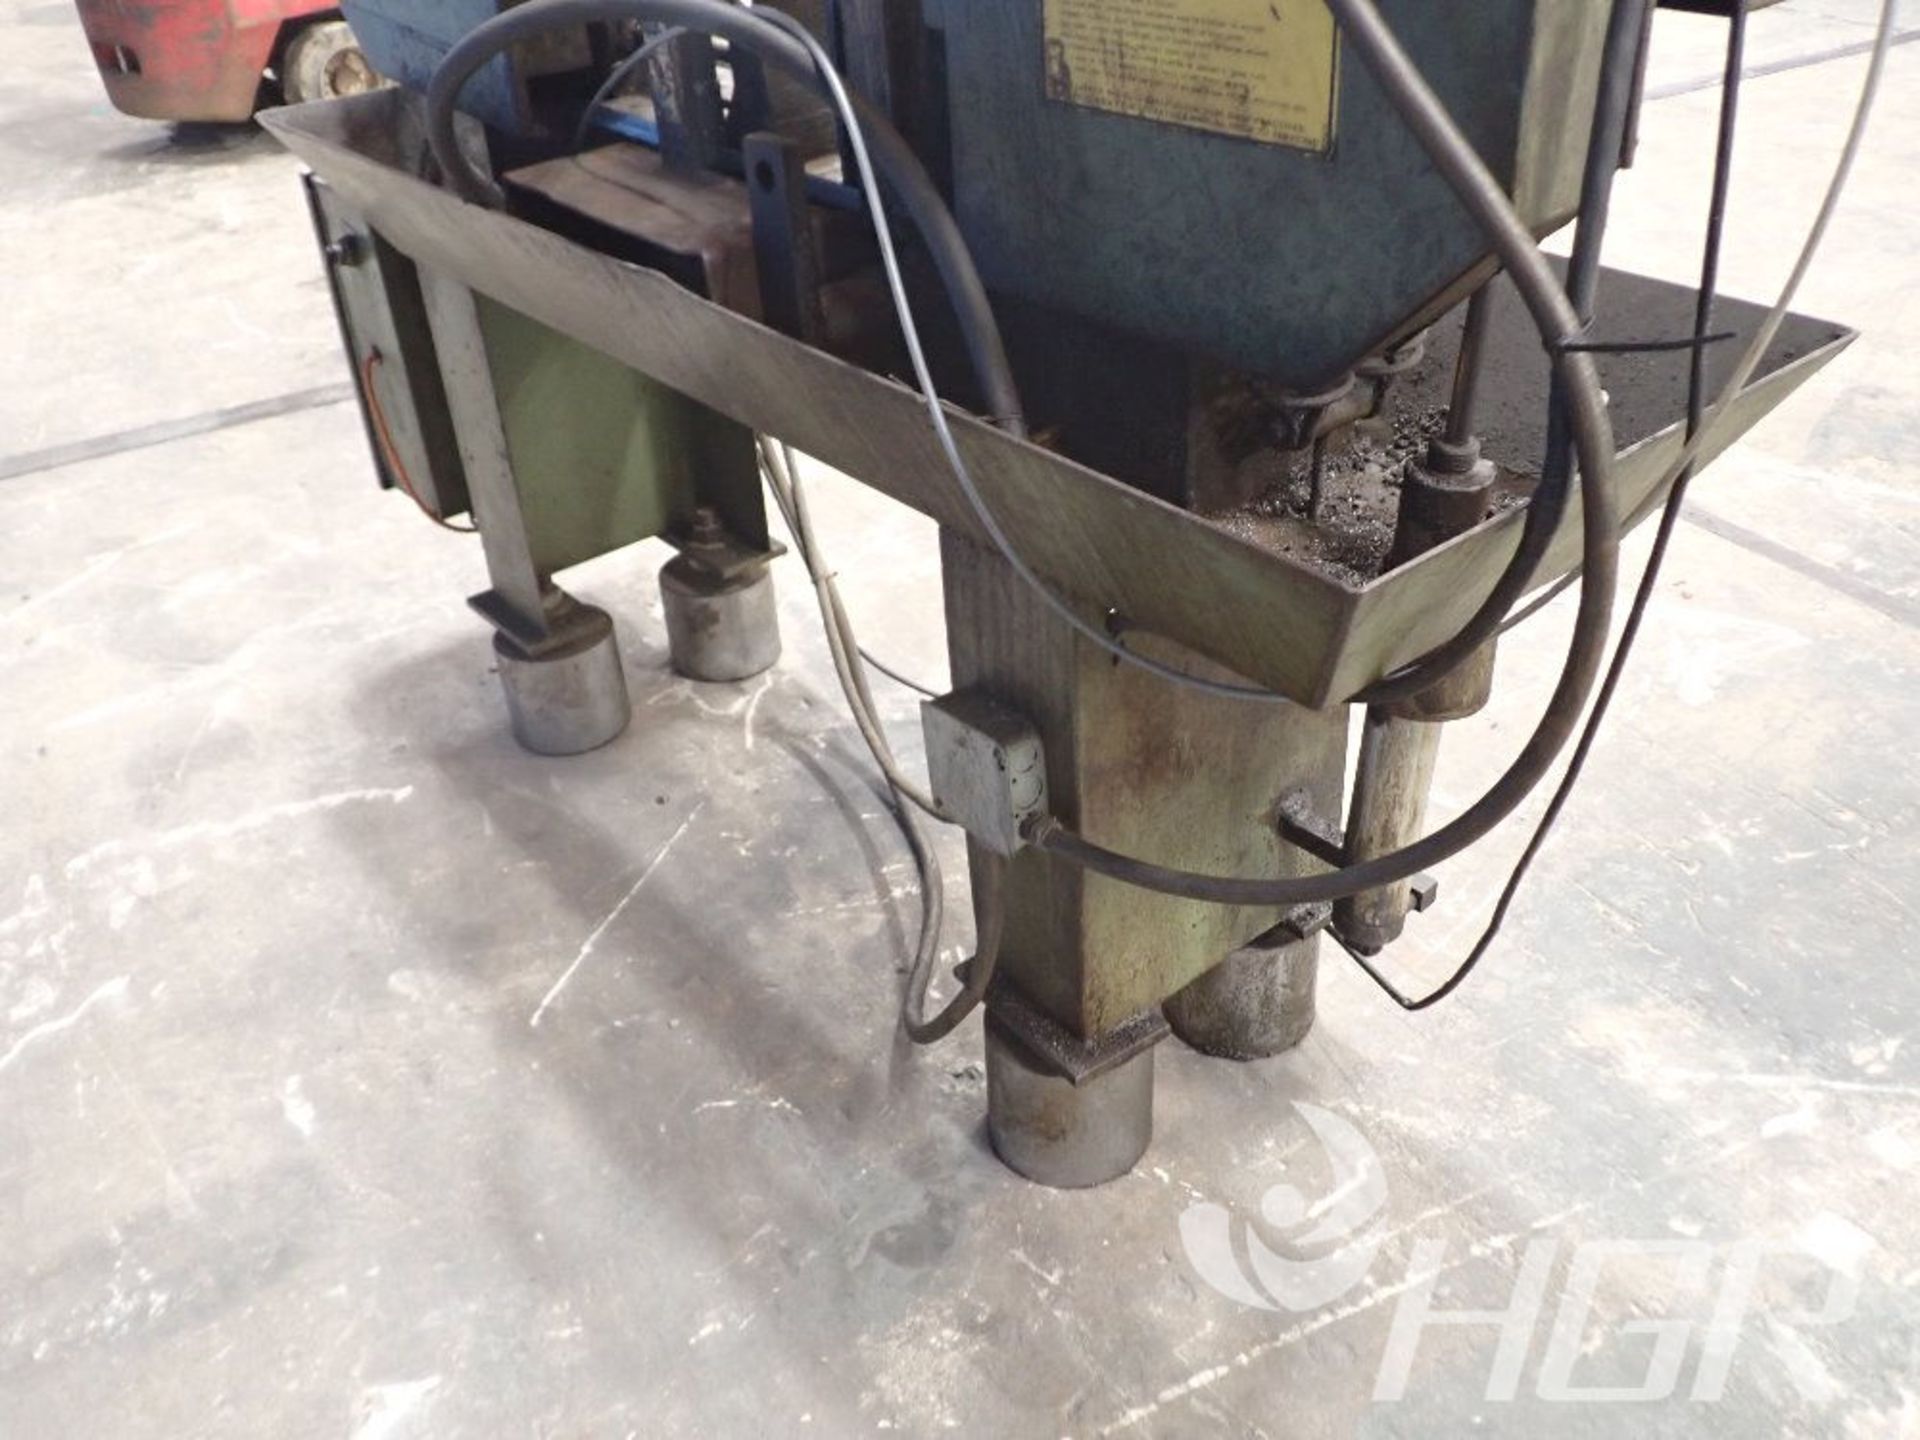 DO ALL HORIZONTAL BANDSAW, Model C-4, Date: n/a; s/n 234-773309, Approx. Capacity: 18", Power: 3/ - Image 18 of 19